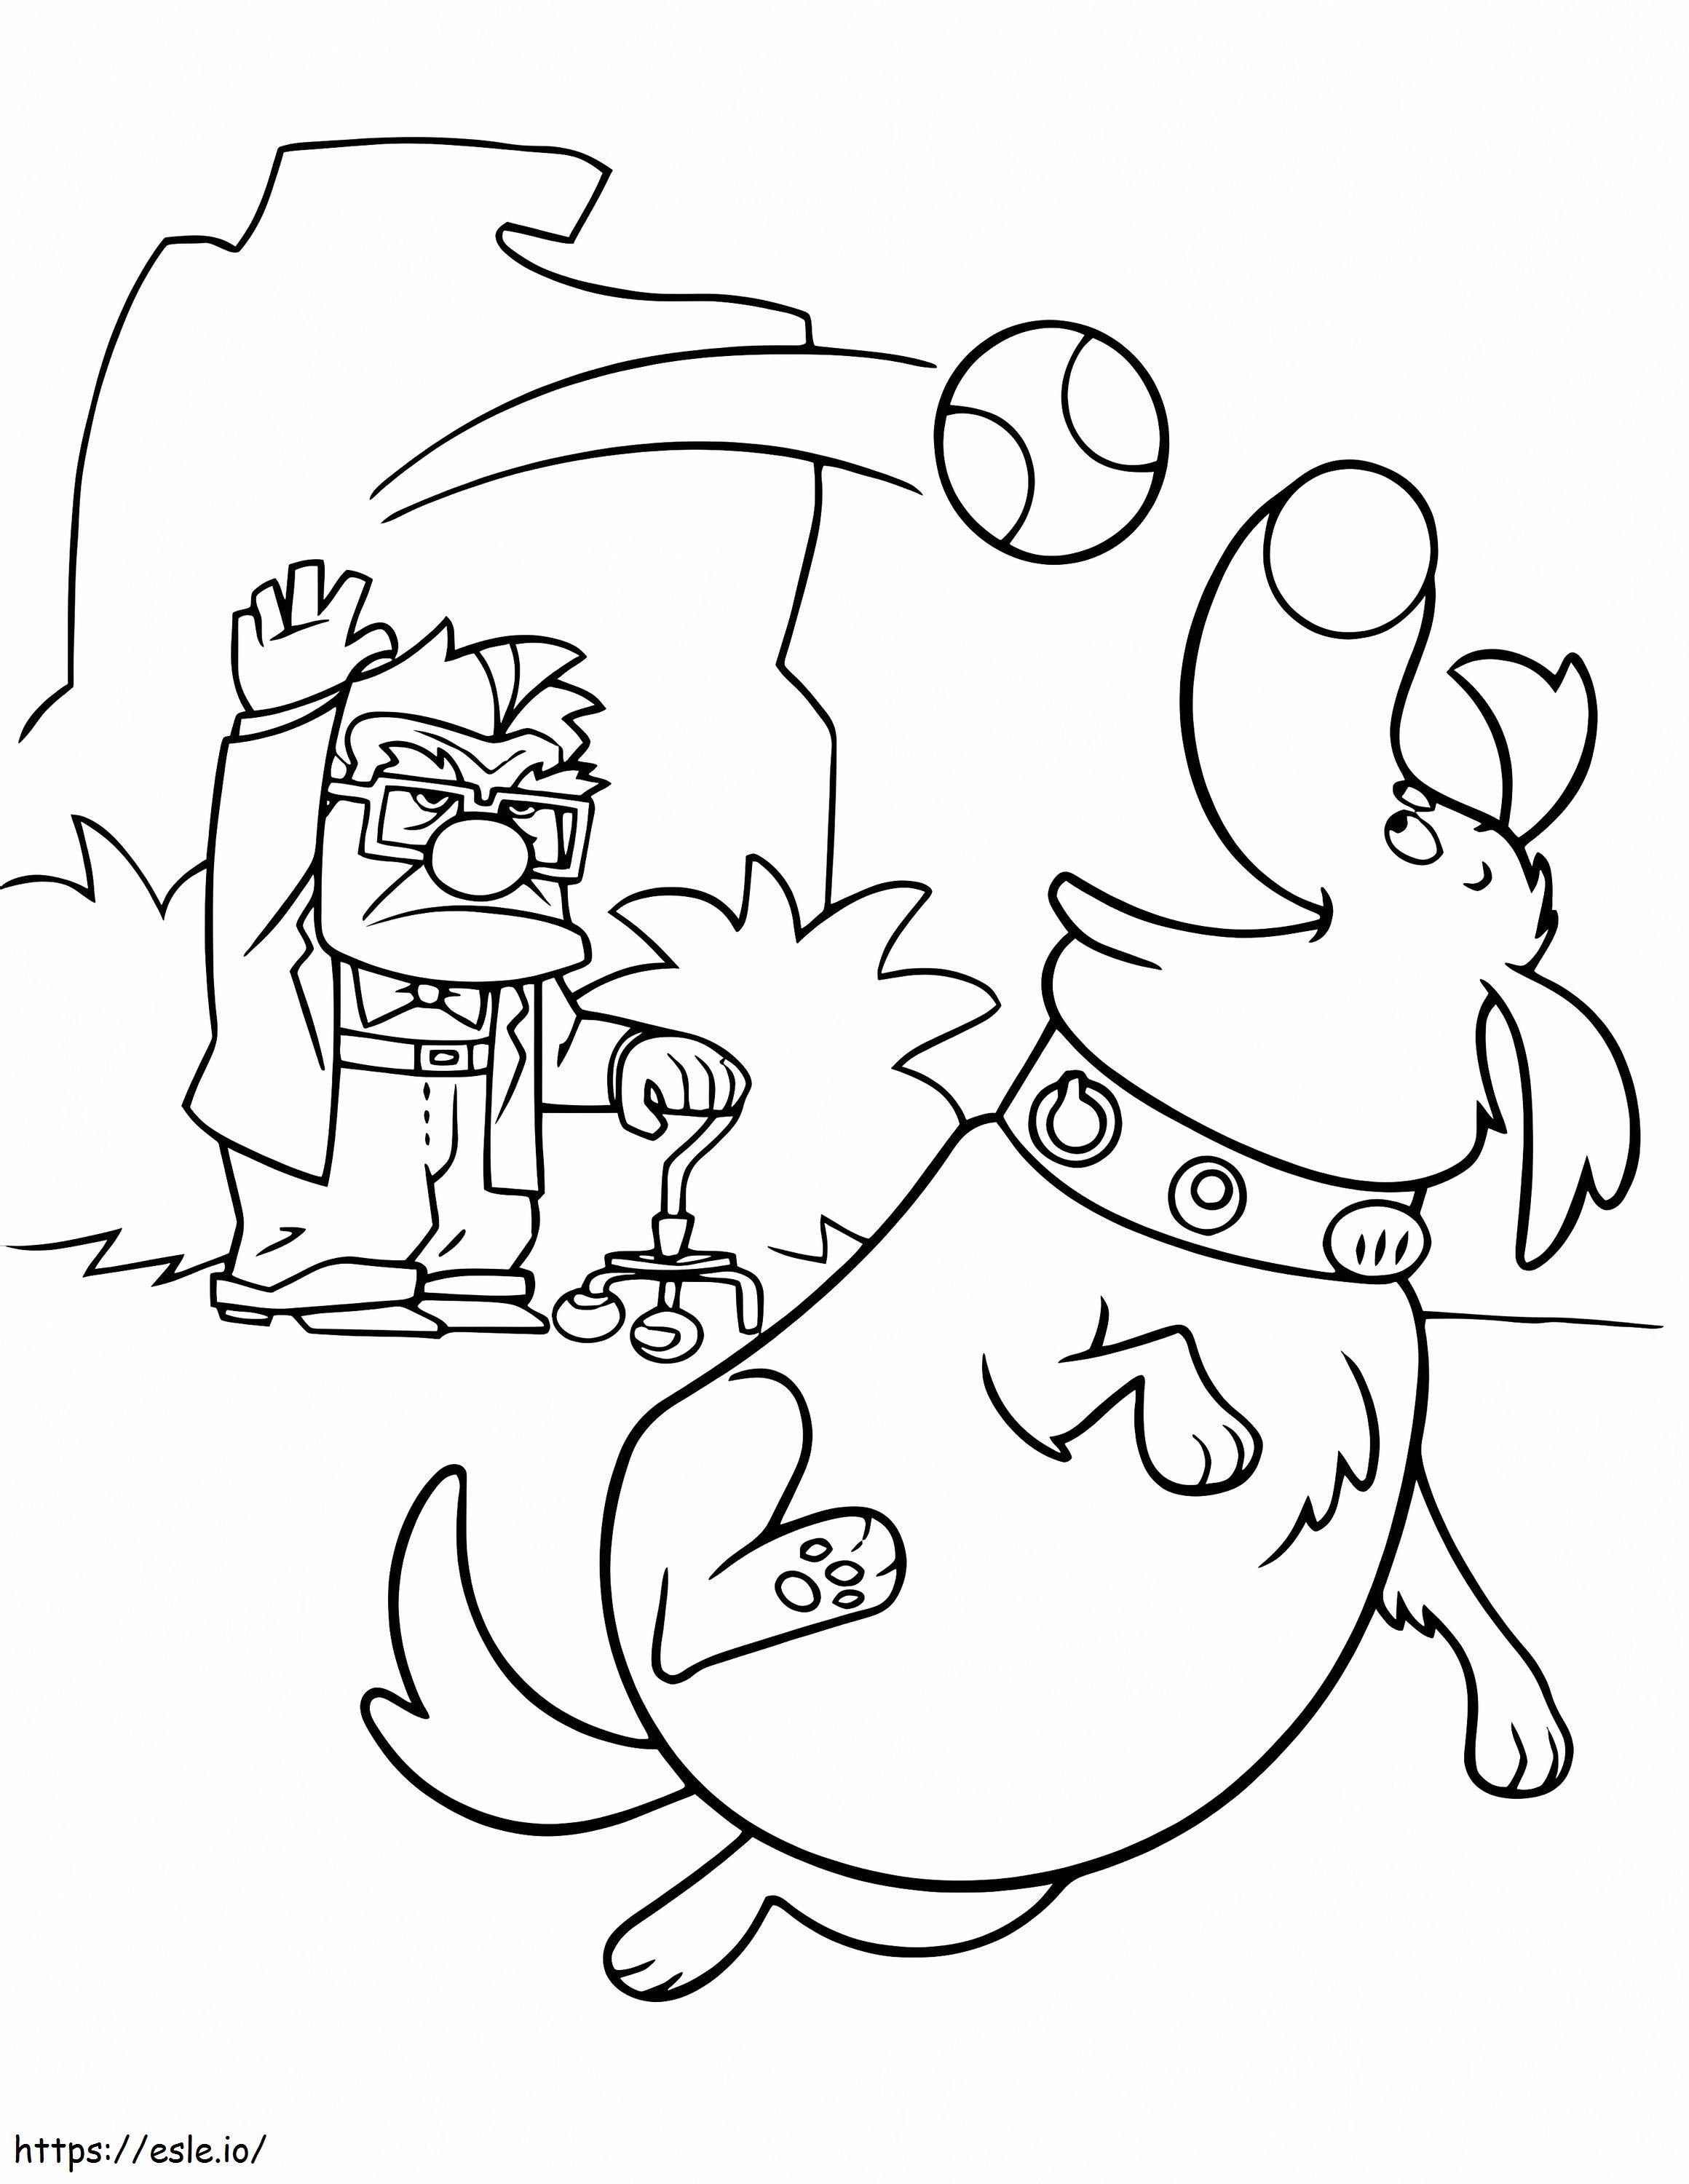 Dug Catching Ball coloring page